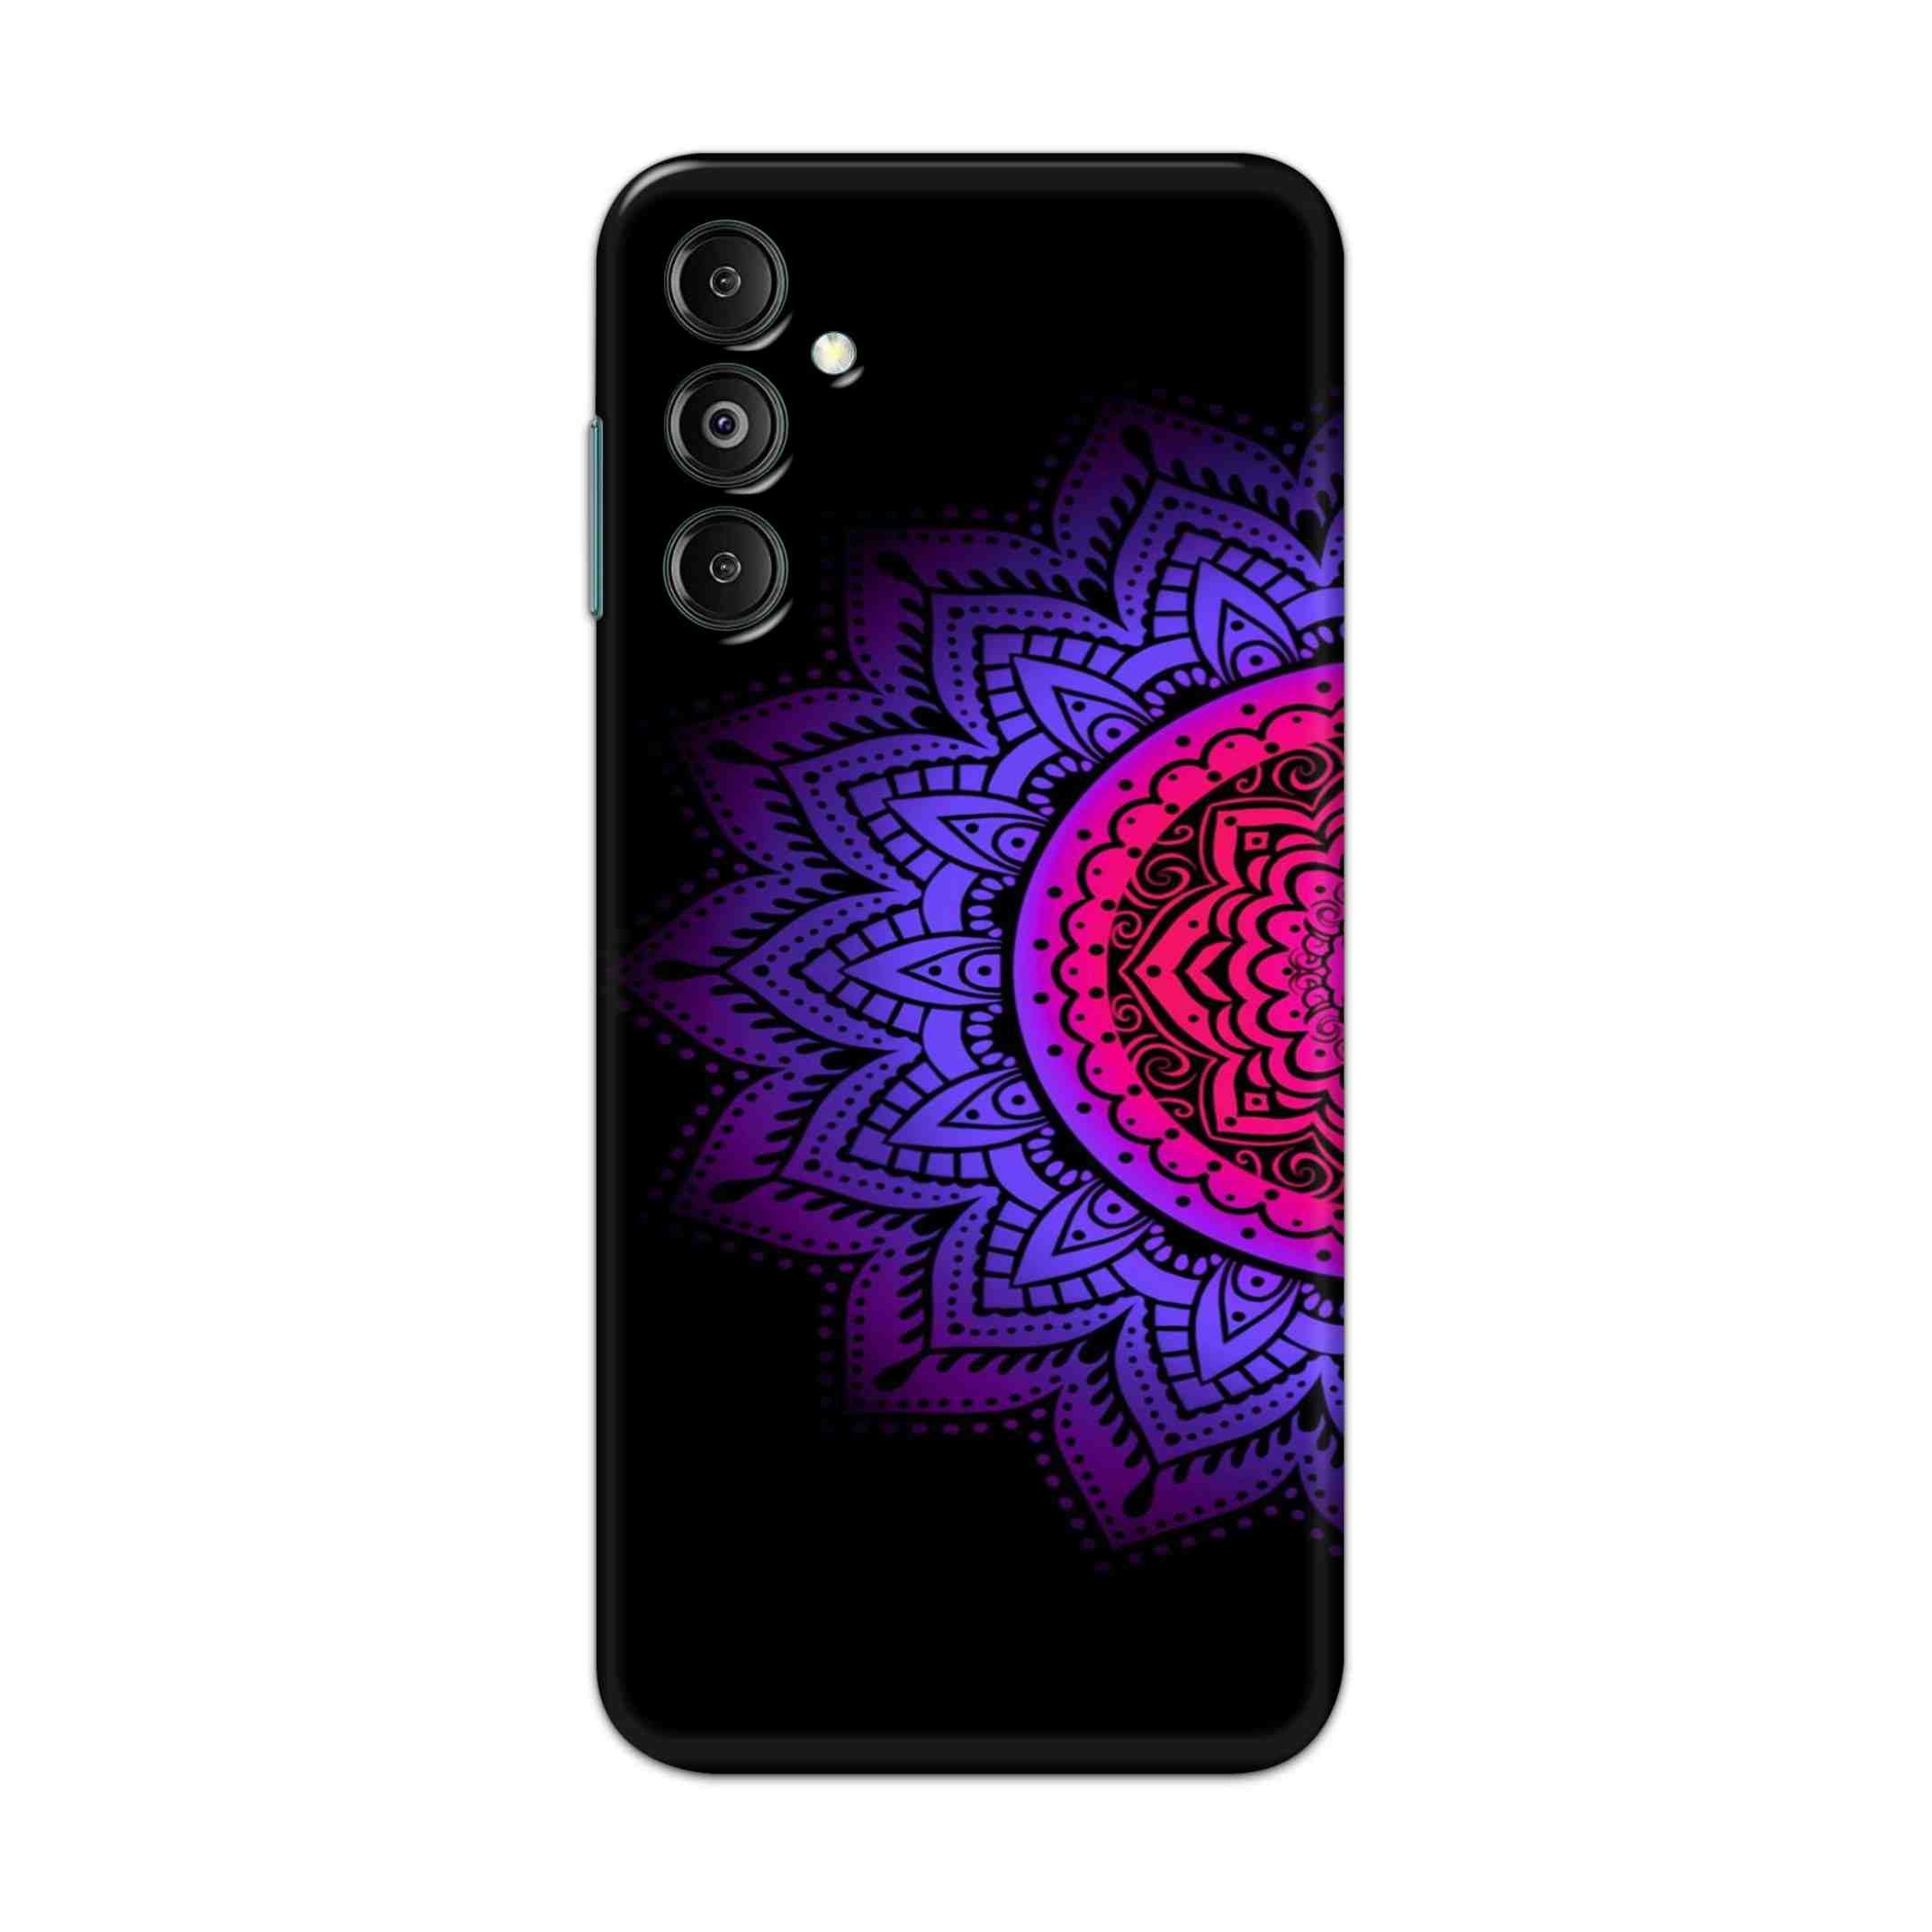 Buy Christian Mandalas Hard Back Mobile Phone Case/Cover For Galaxy M14 5G Online